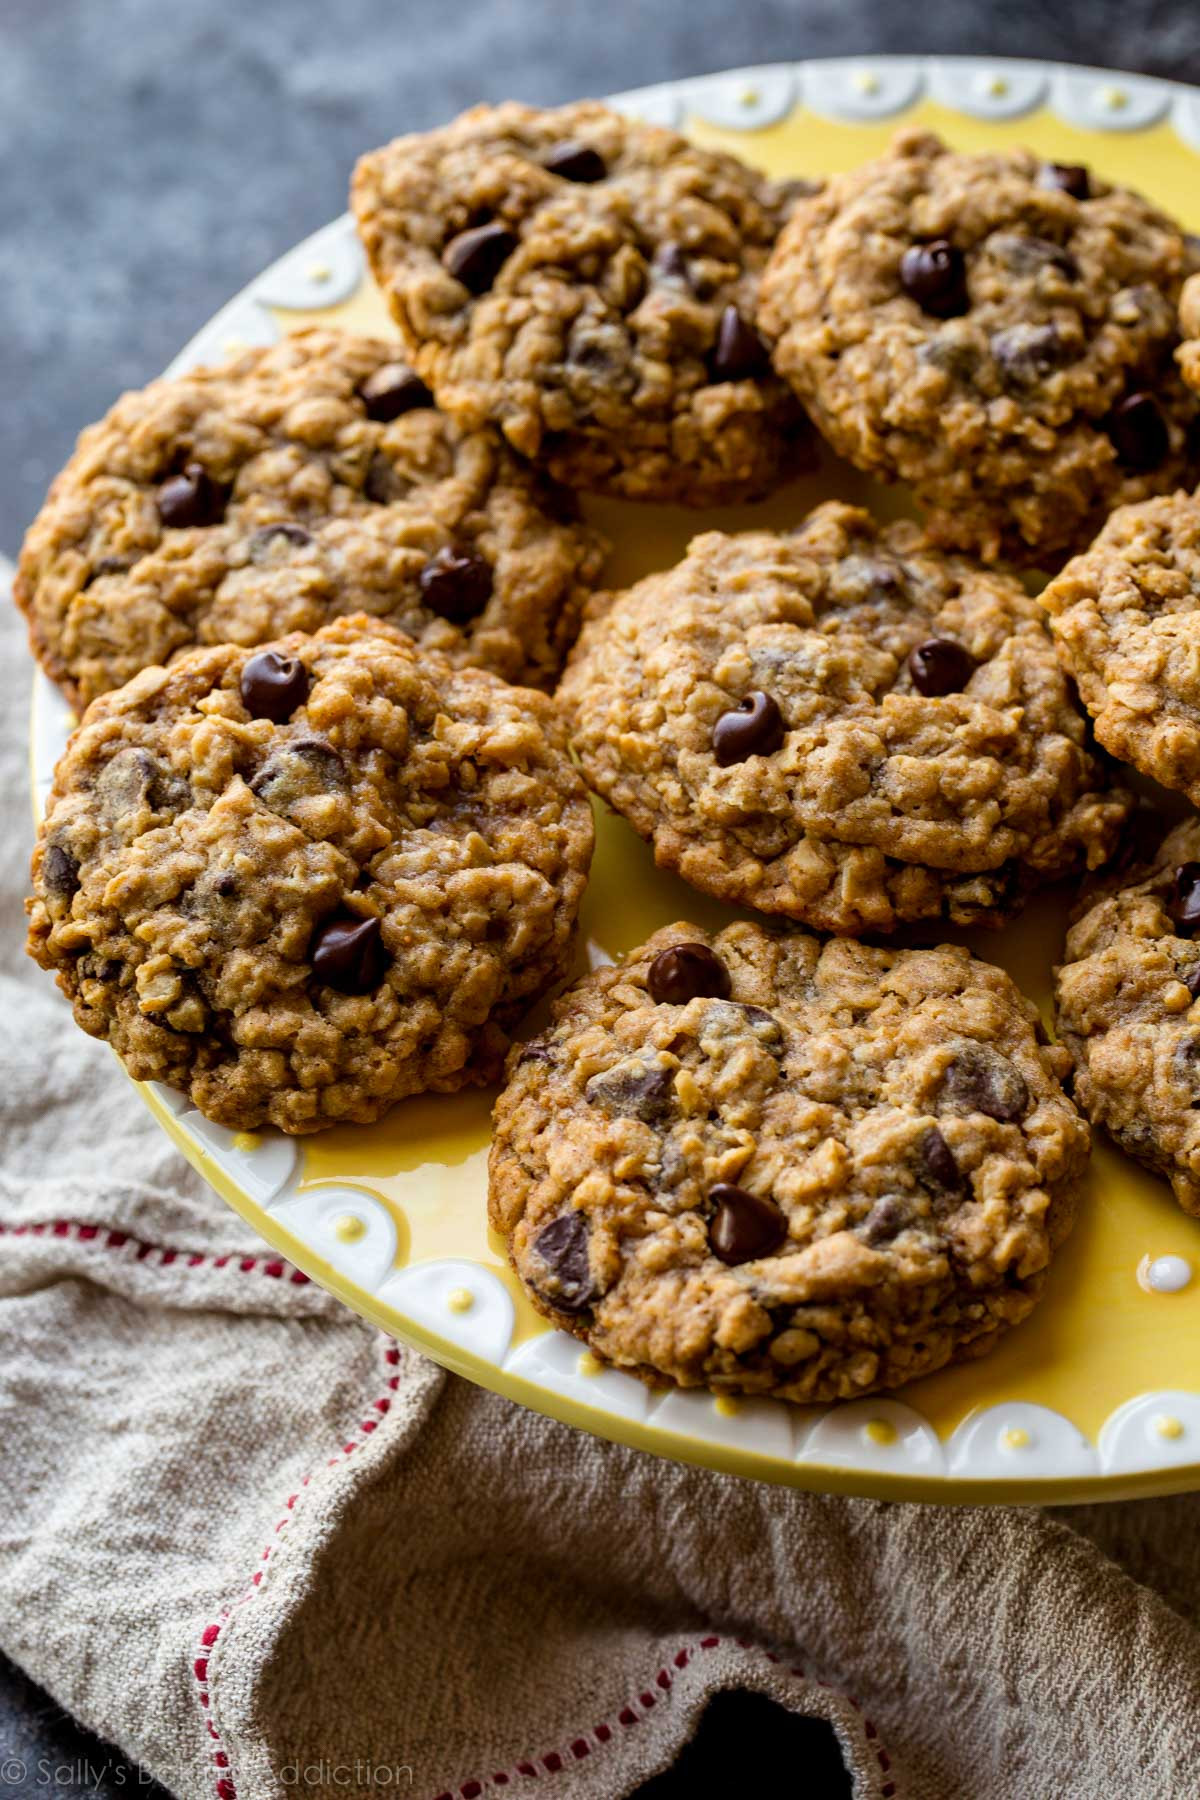 Best Oatmeal Chocolate Chip Cookies
 Soft & Chewy Oatmeal Chocolate Chip Cookies Sallys